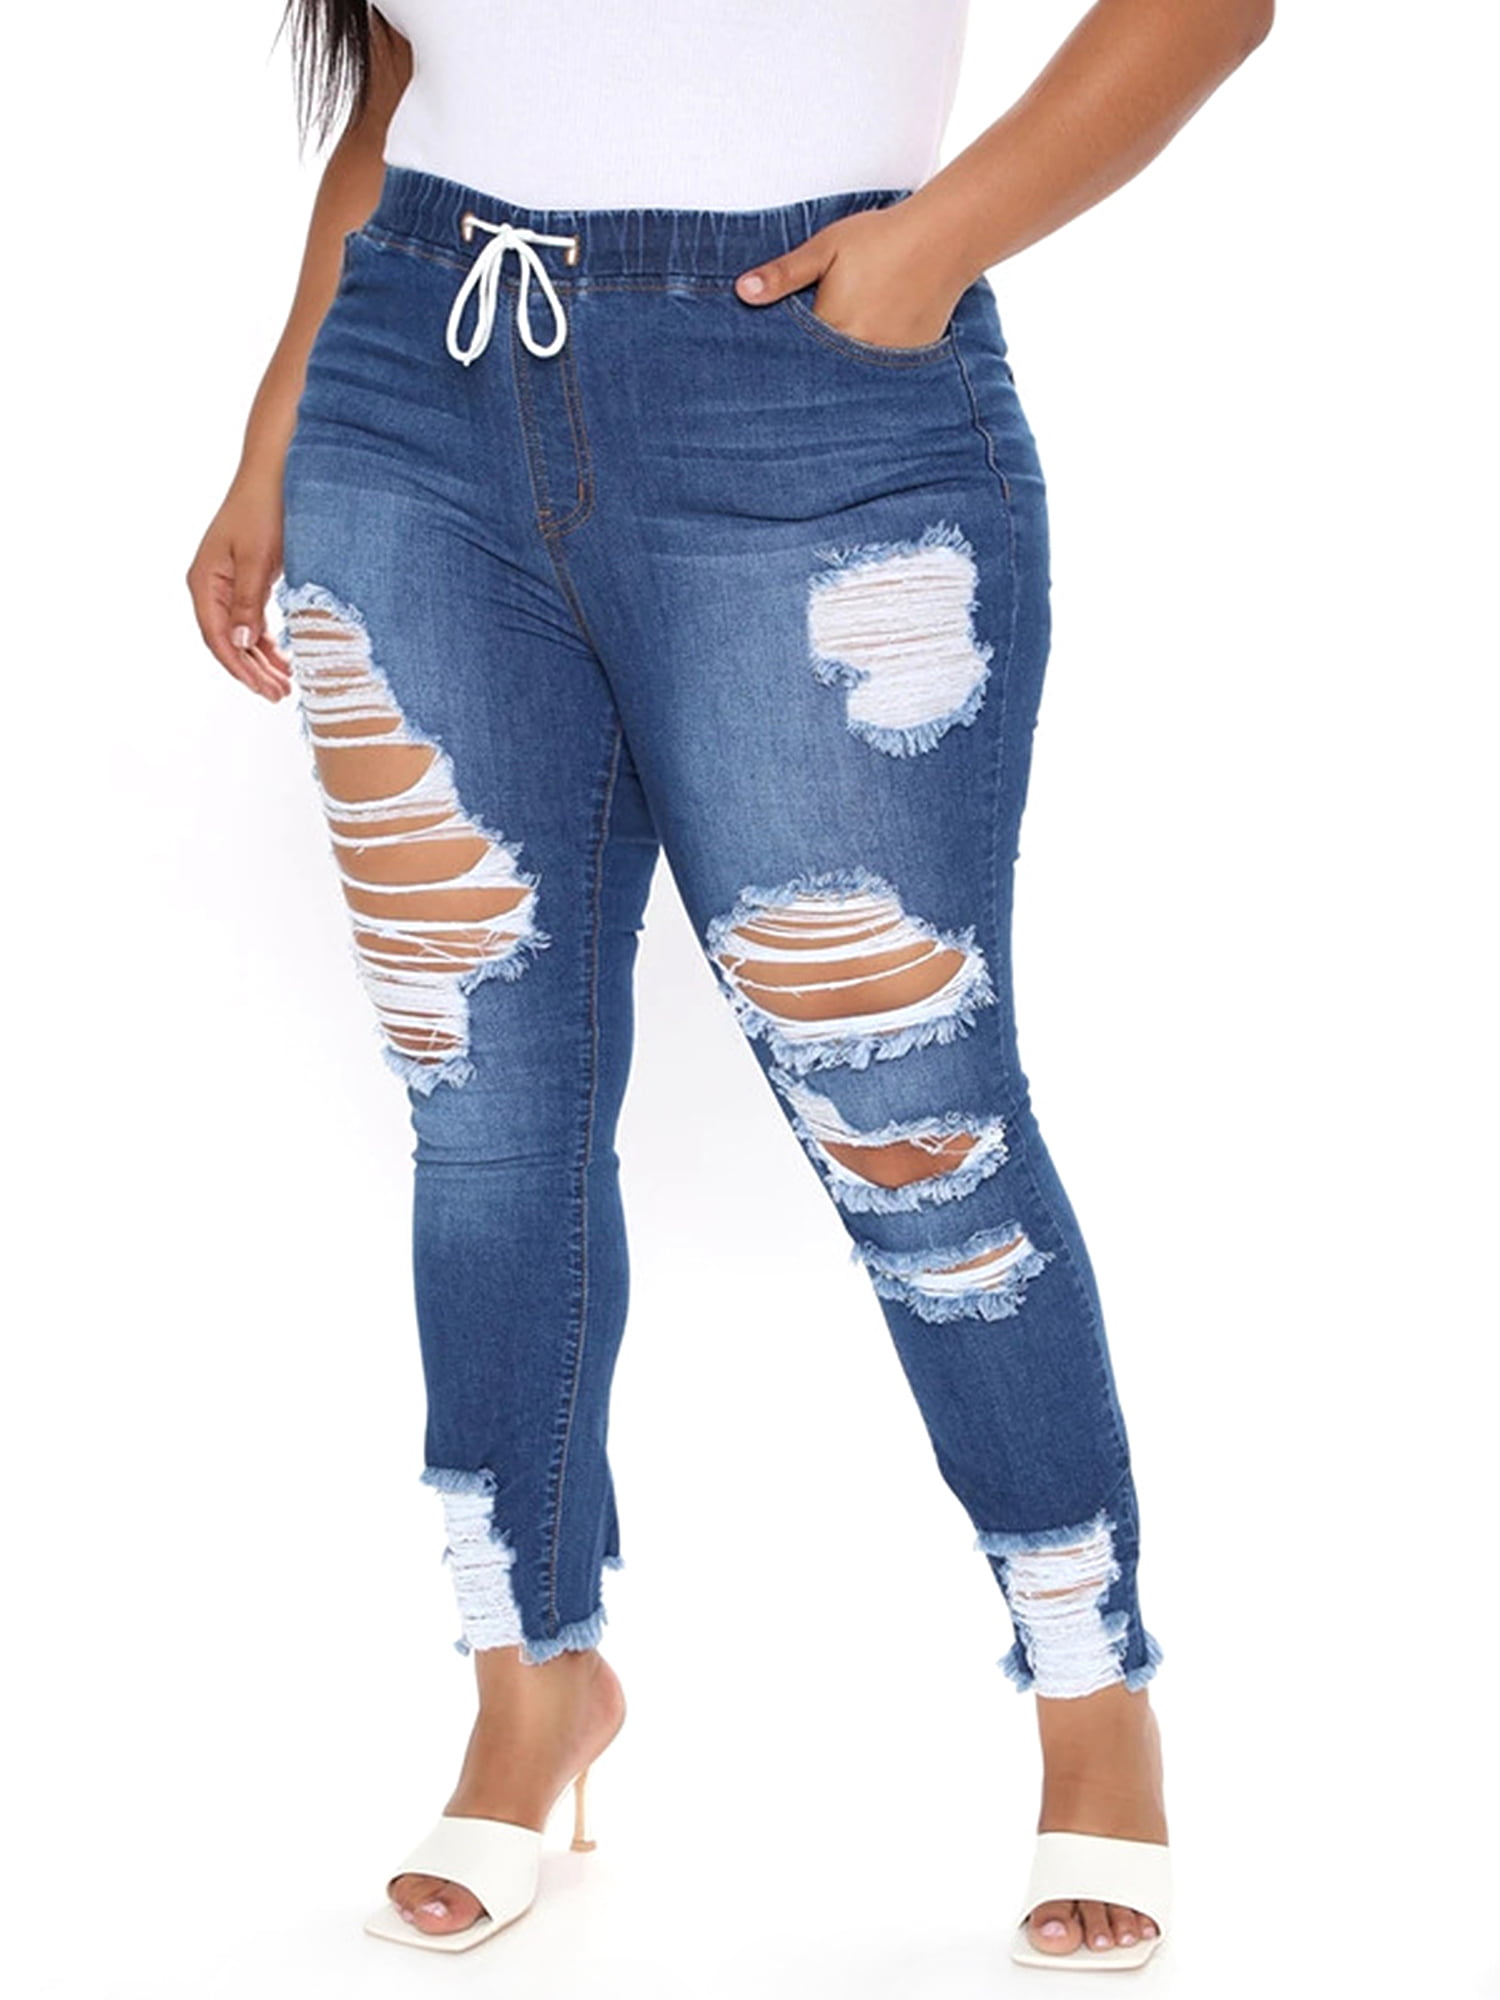 Ripped Jeans for Sexy Big Stretch Skinny Jeans Denim Pants High Waist Juniors Distressed Hole Cute Trouser Pants -